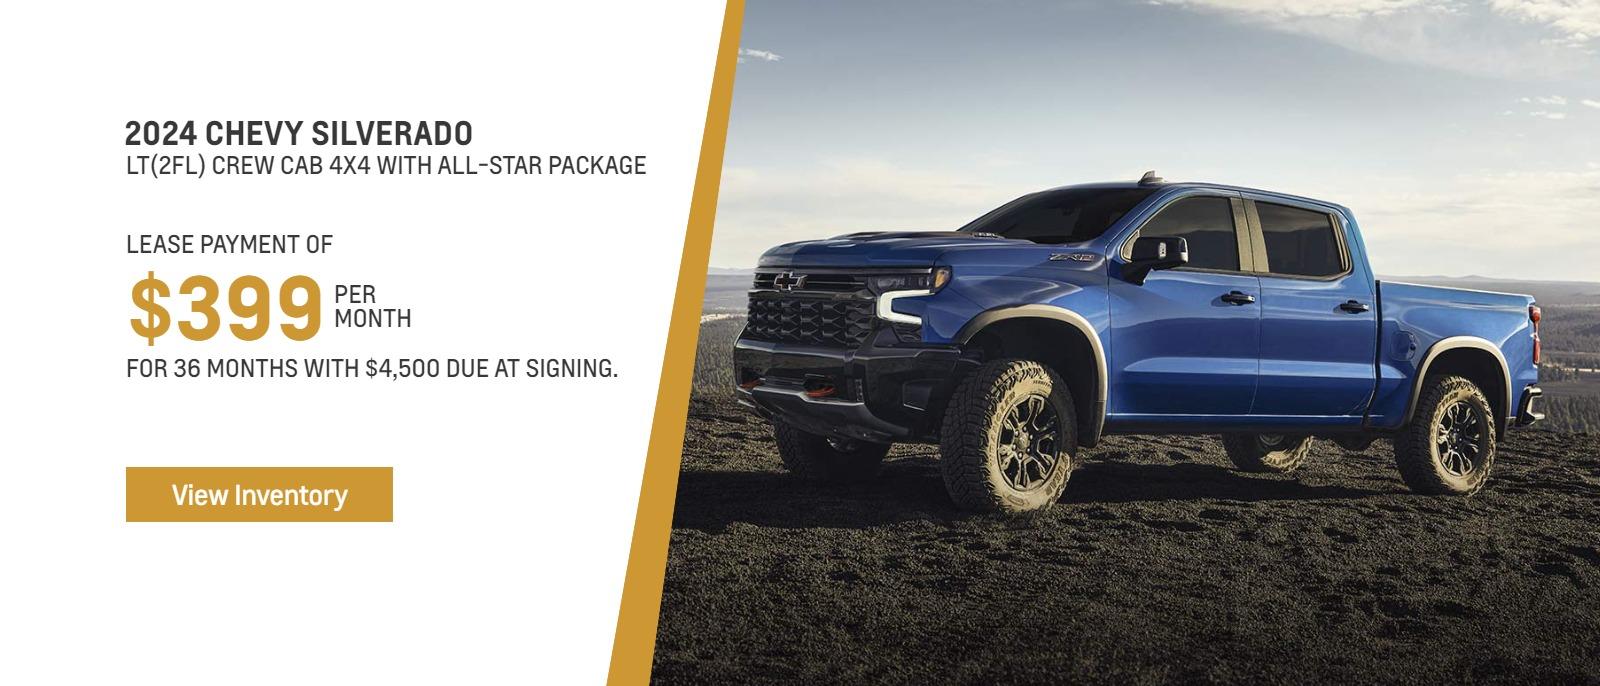 2024 Chevy Silverado LT(2FL) 
Crew Cab 4x4 with all-star package
Lease payment of $399 for 36 months with $4500 due at signing.